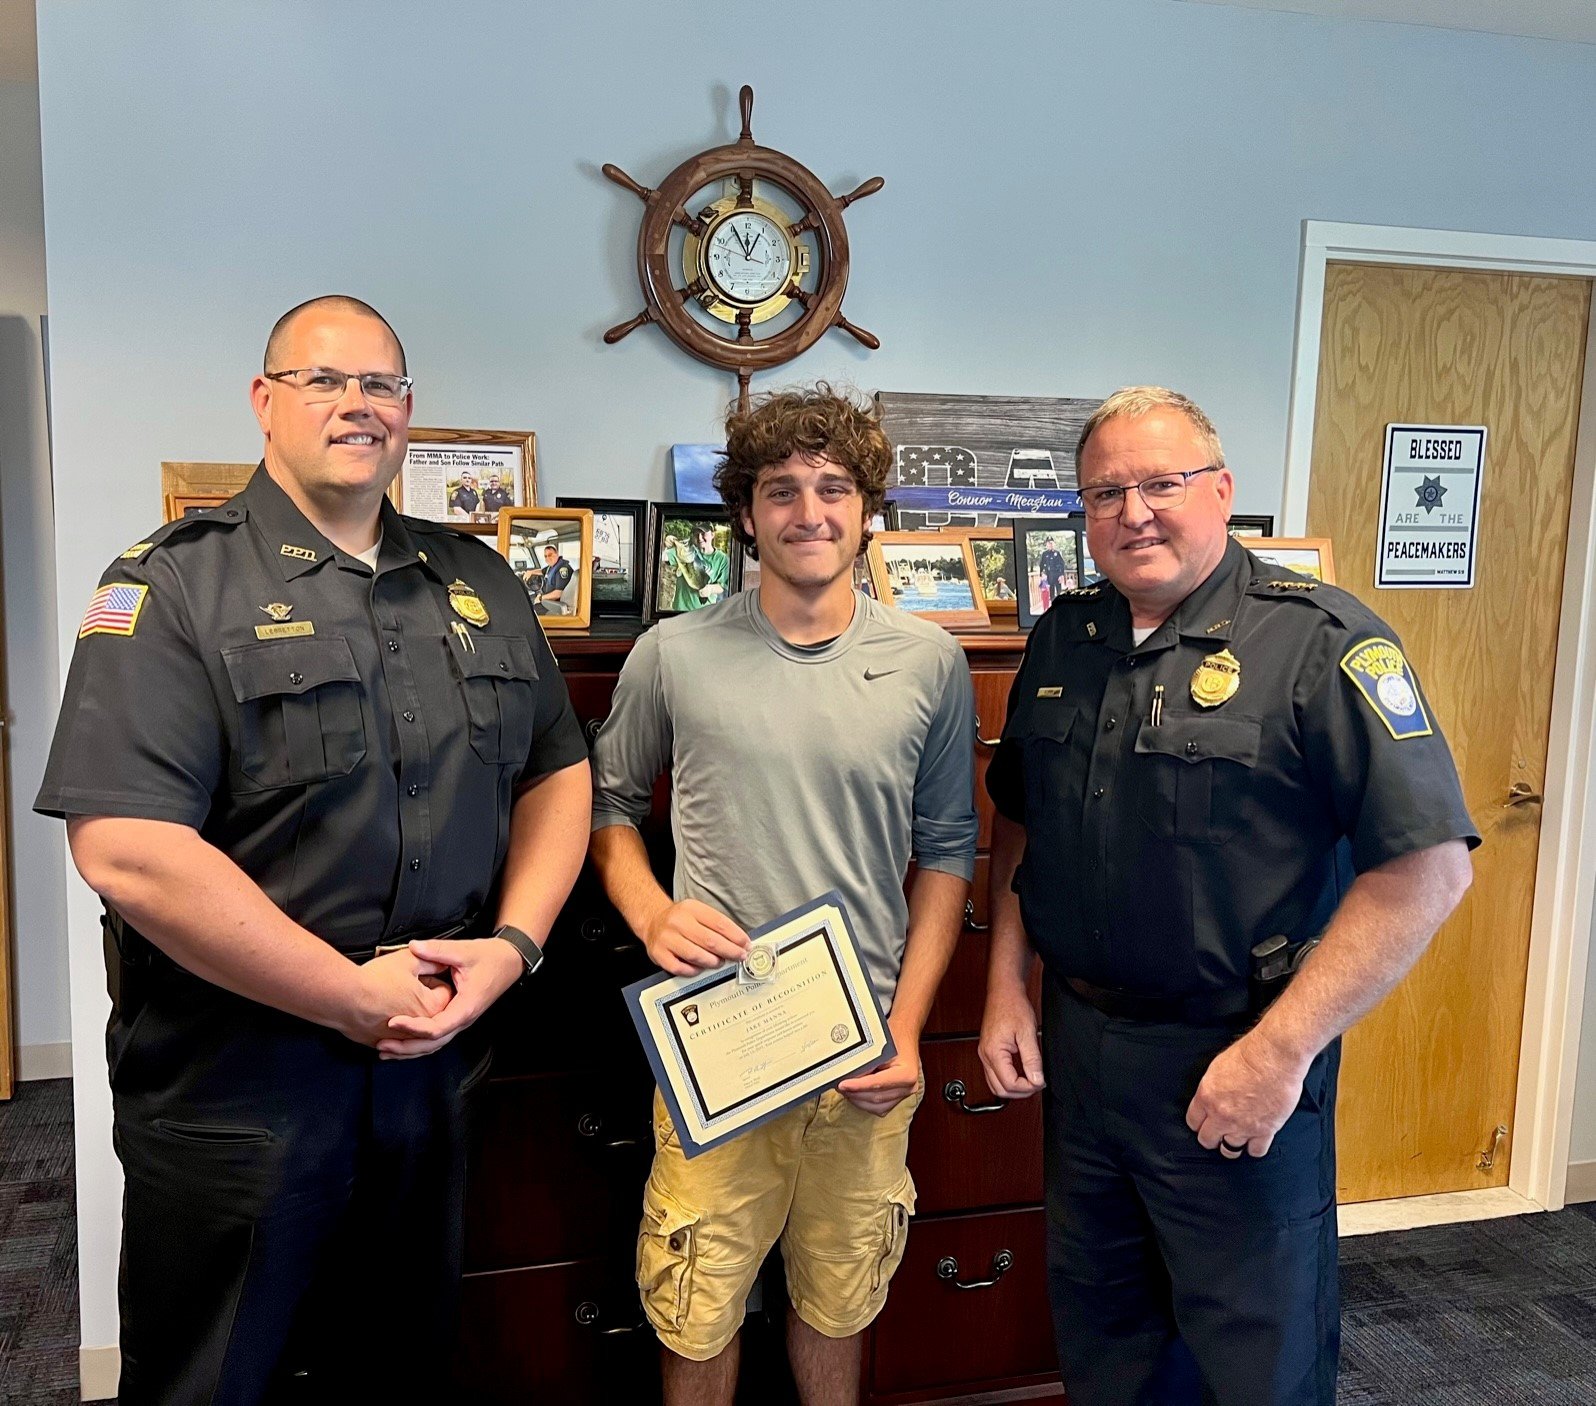 jake manna posing with two plymouth police officers as he holds his certificate for helping save a little girl's life.